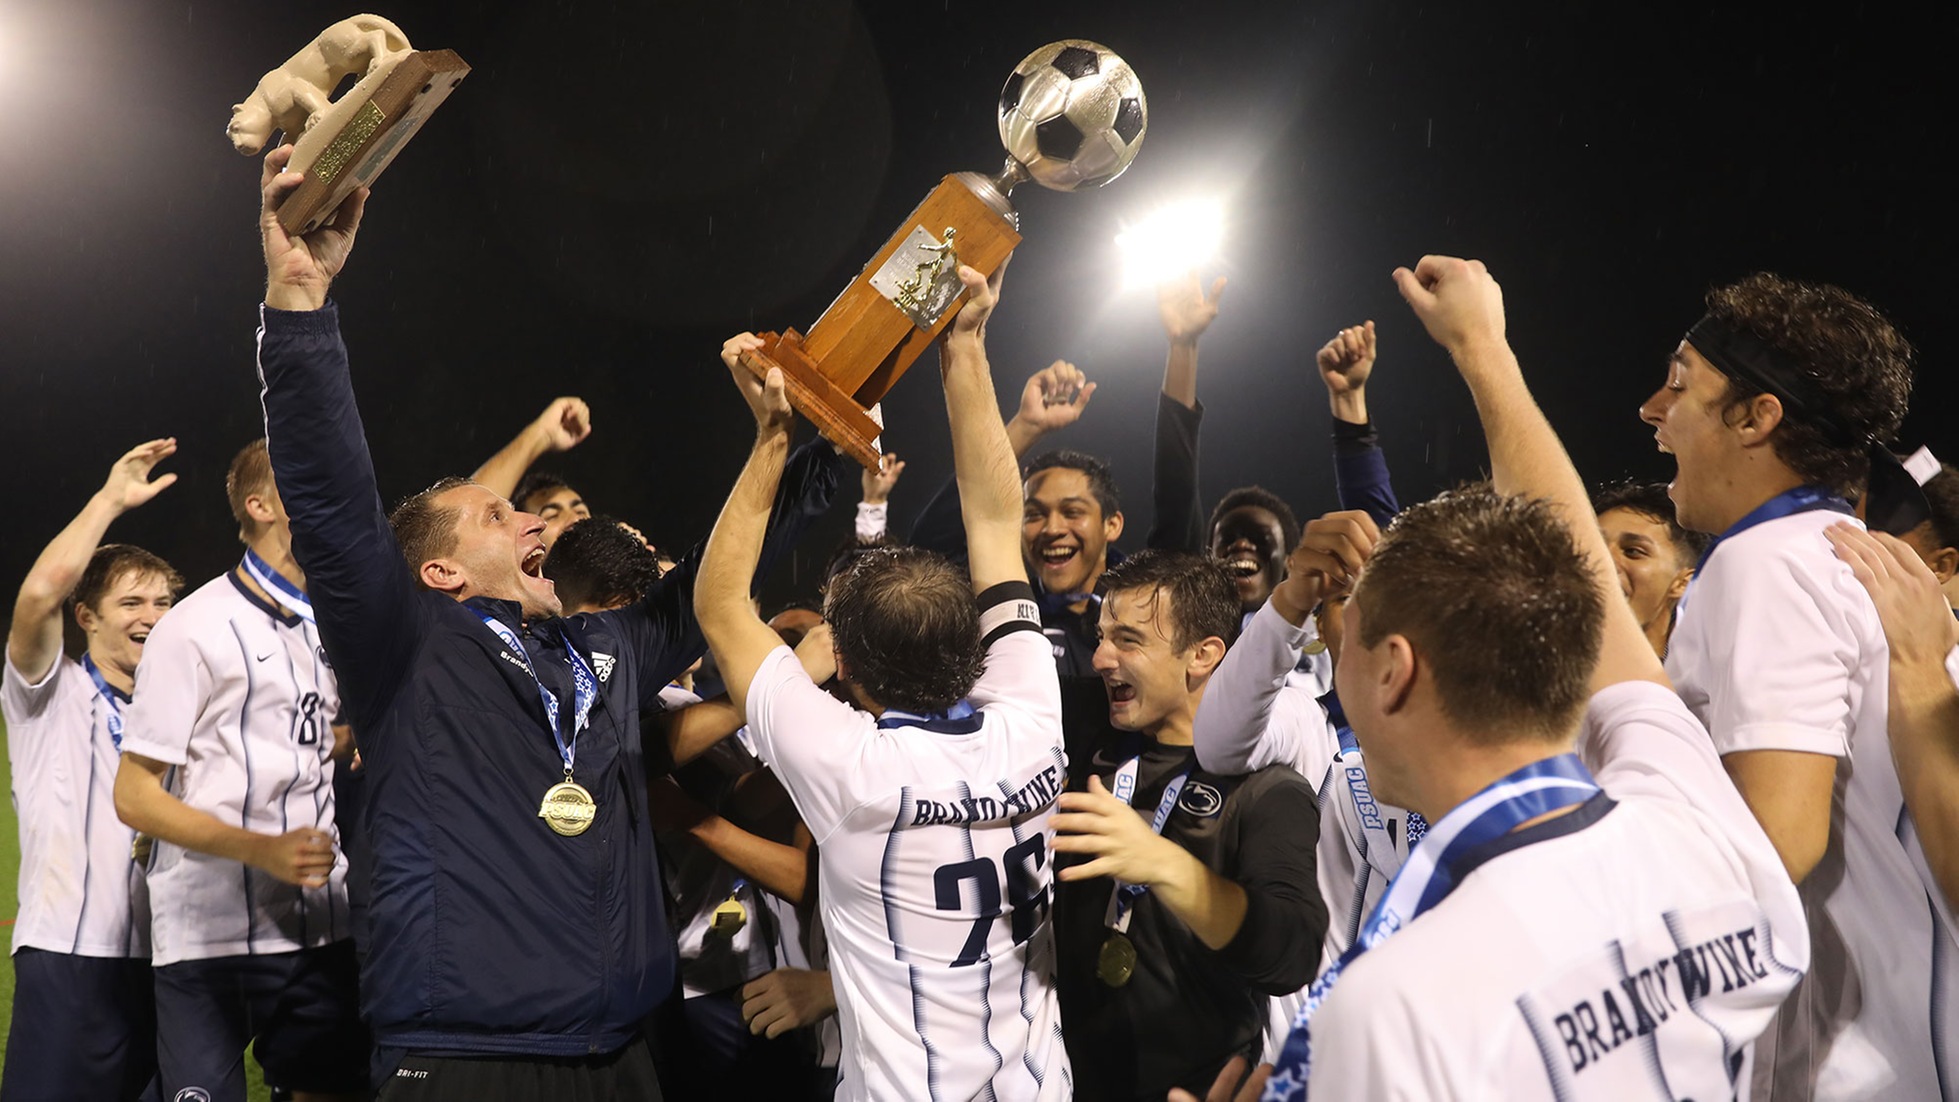 Men's soccer celebrated its fourth-straight PSUAC title in 2019